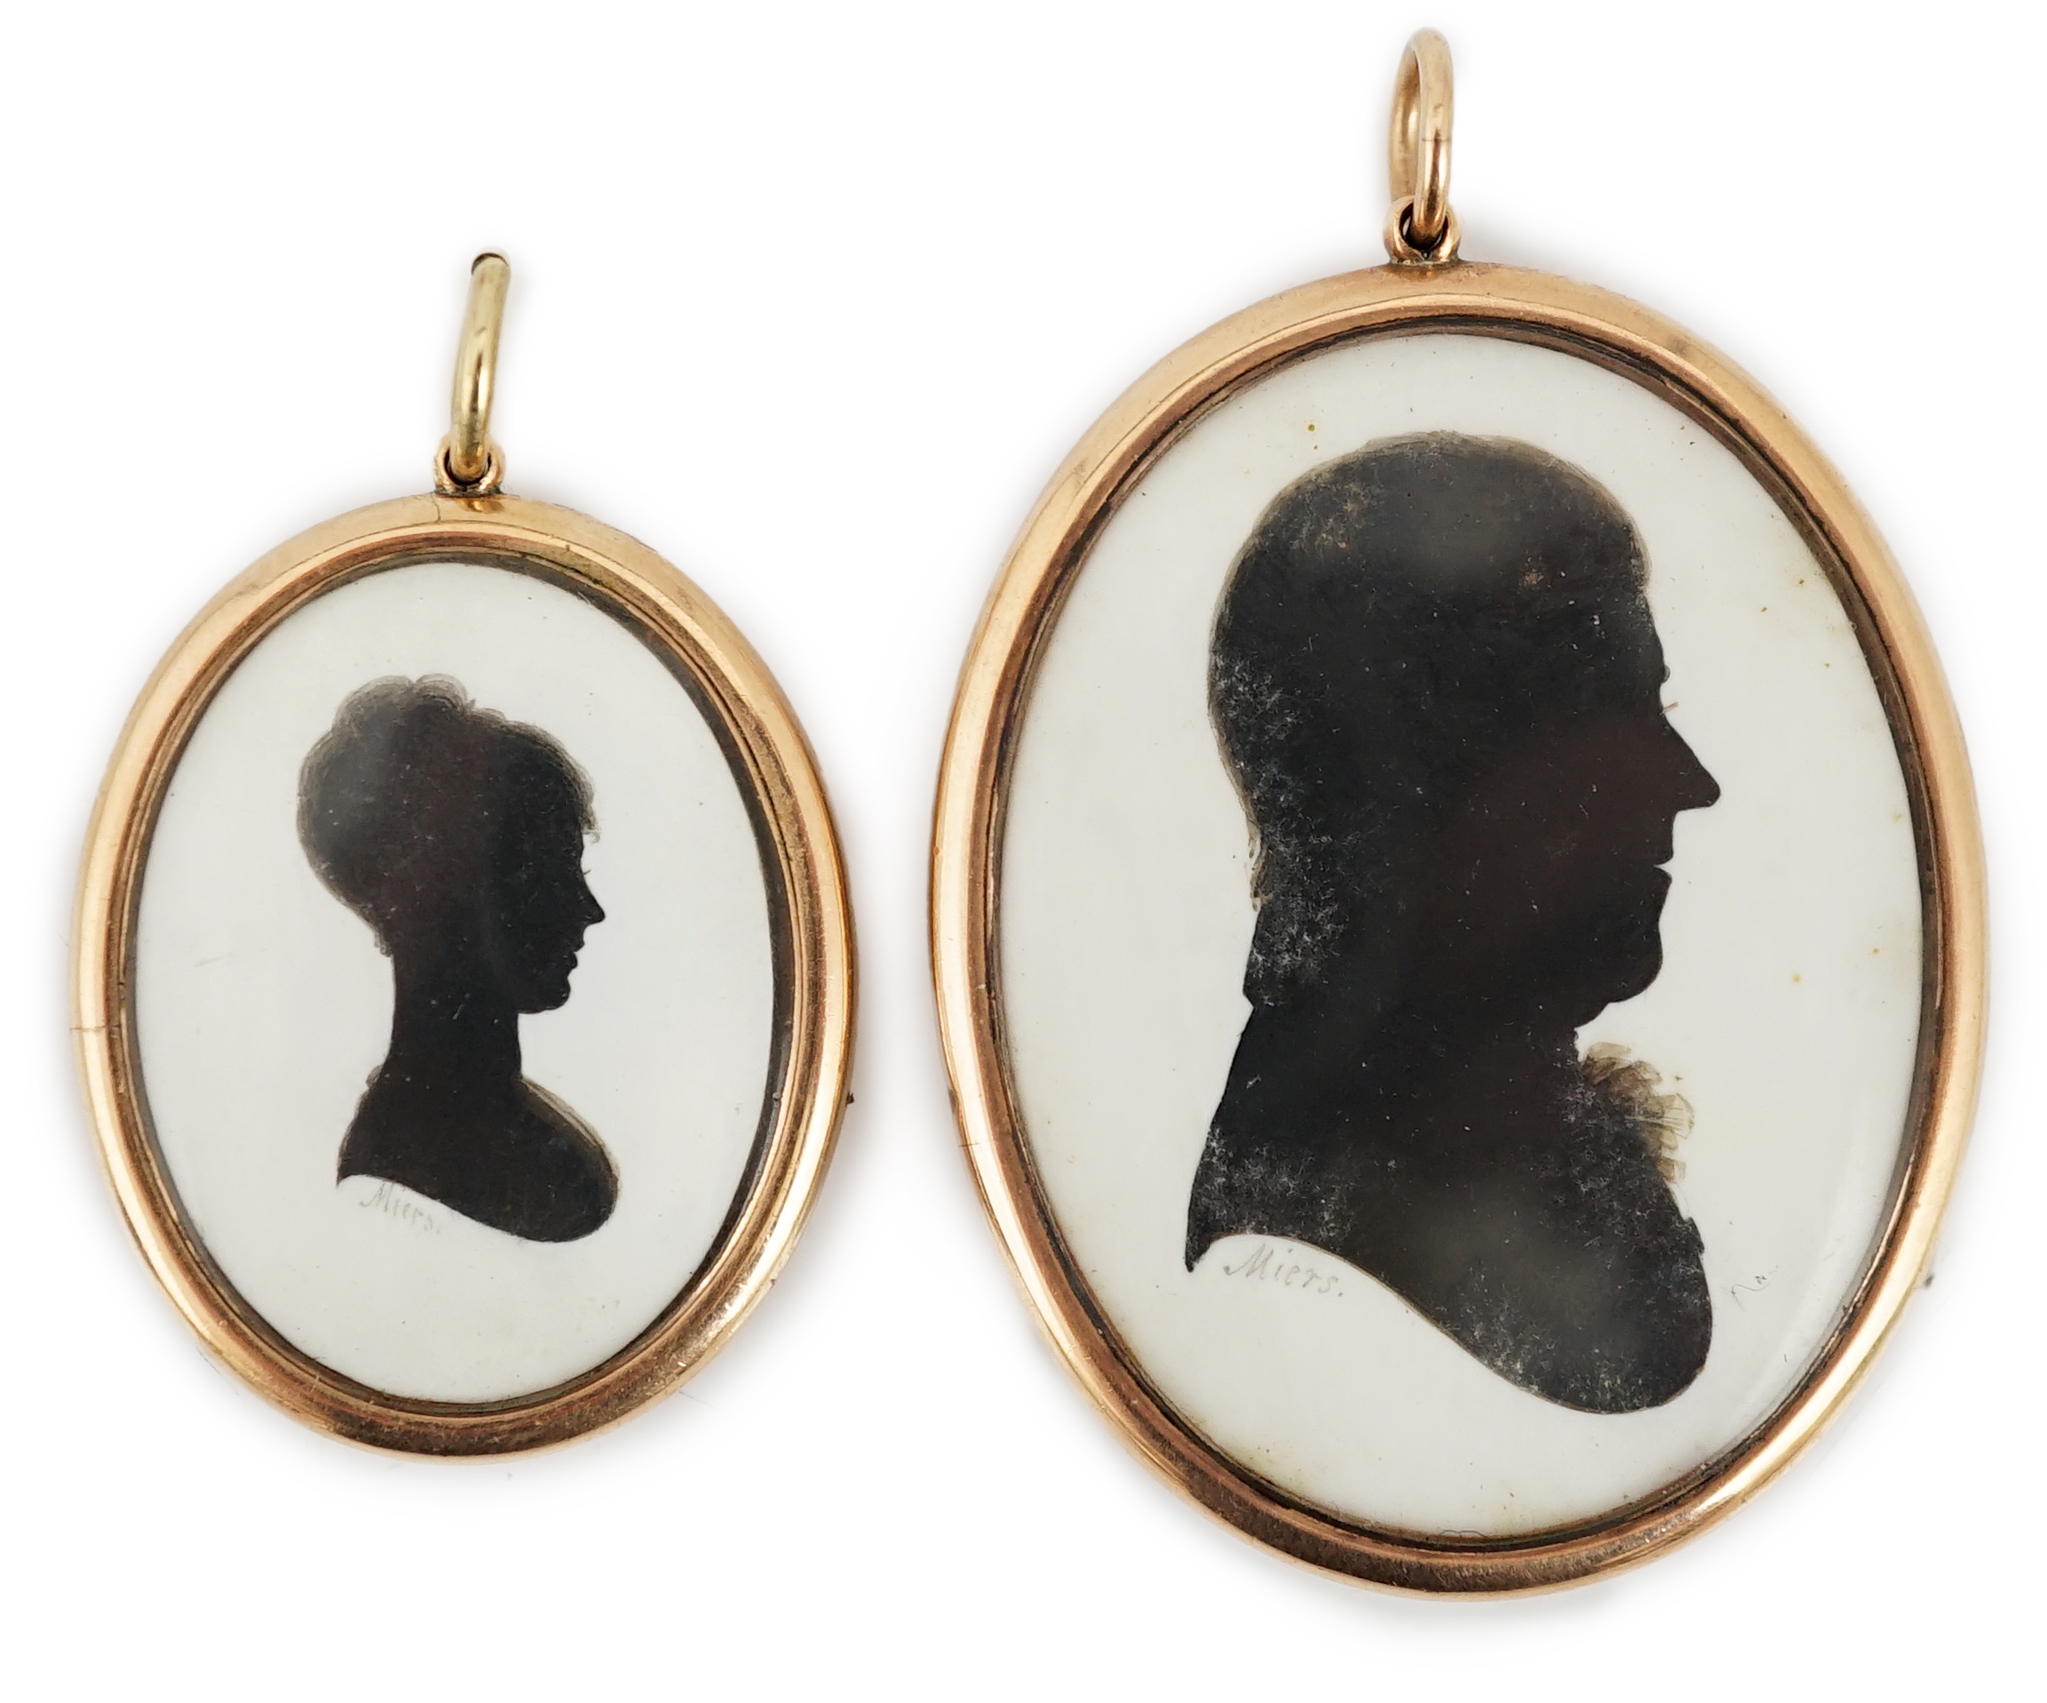 John Miers (1756-1821), Silhouettes of a lady and gentleman, painted plaster